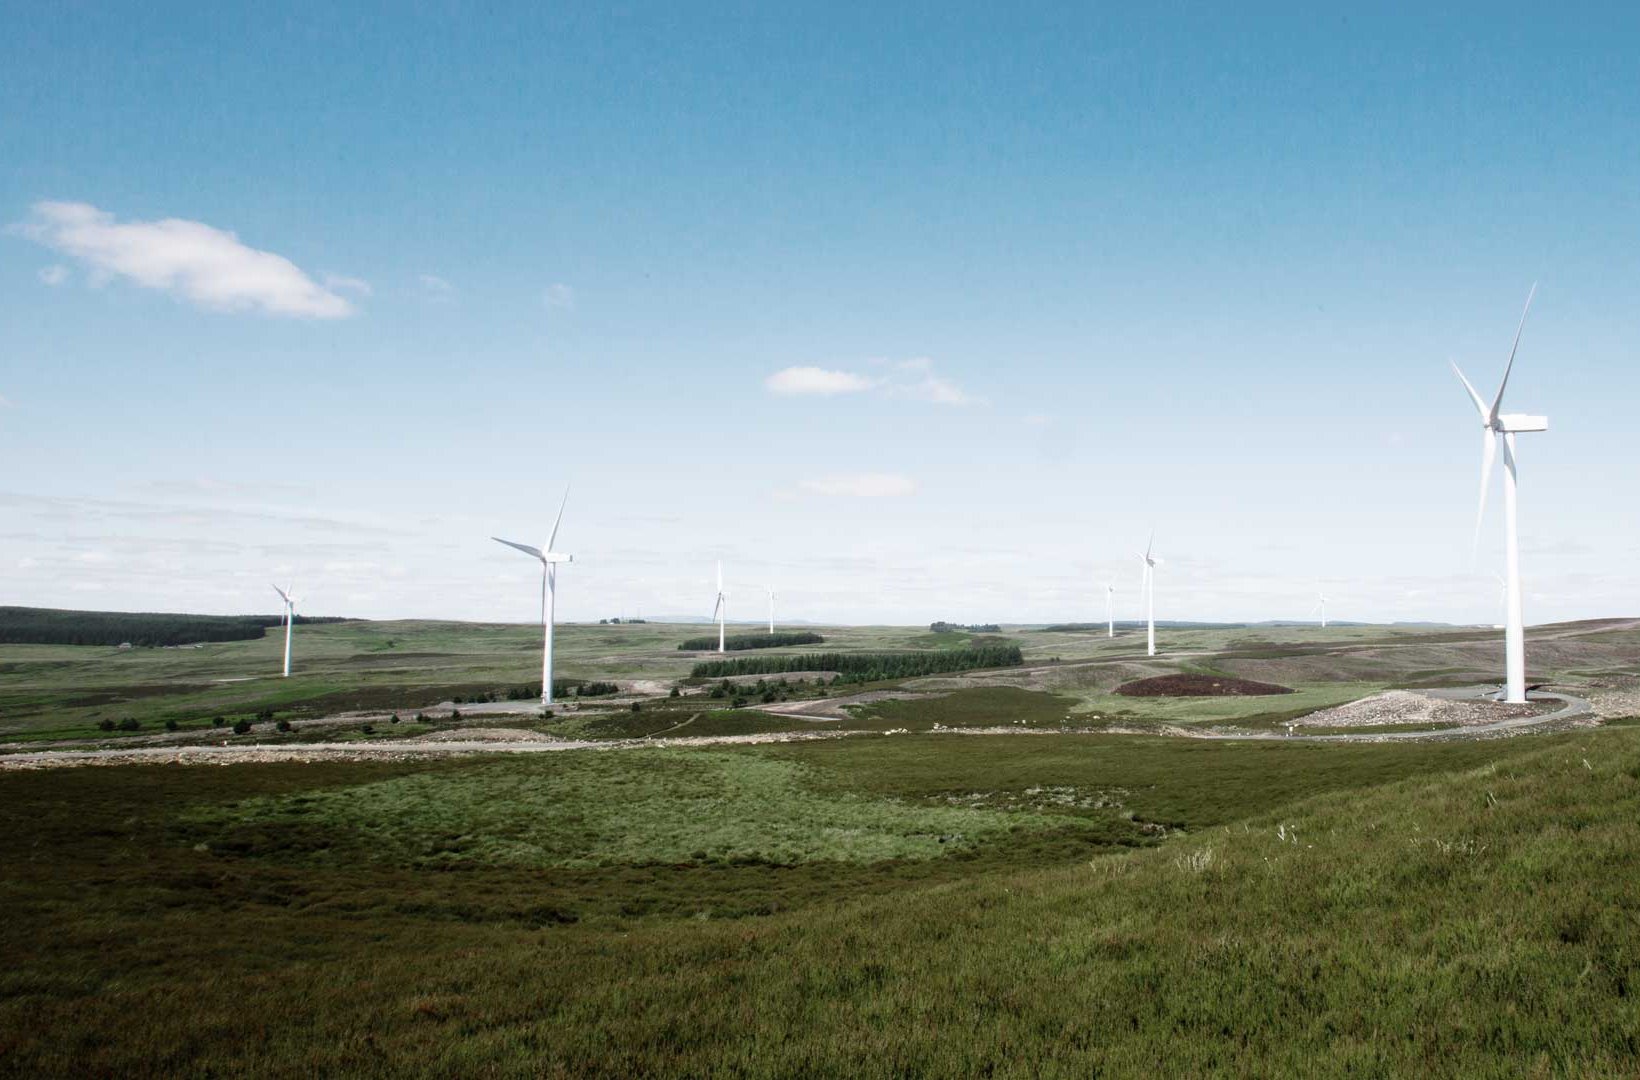 The Ray wind farm in the UK